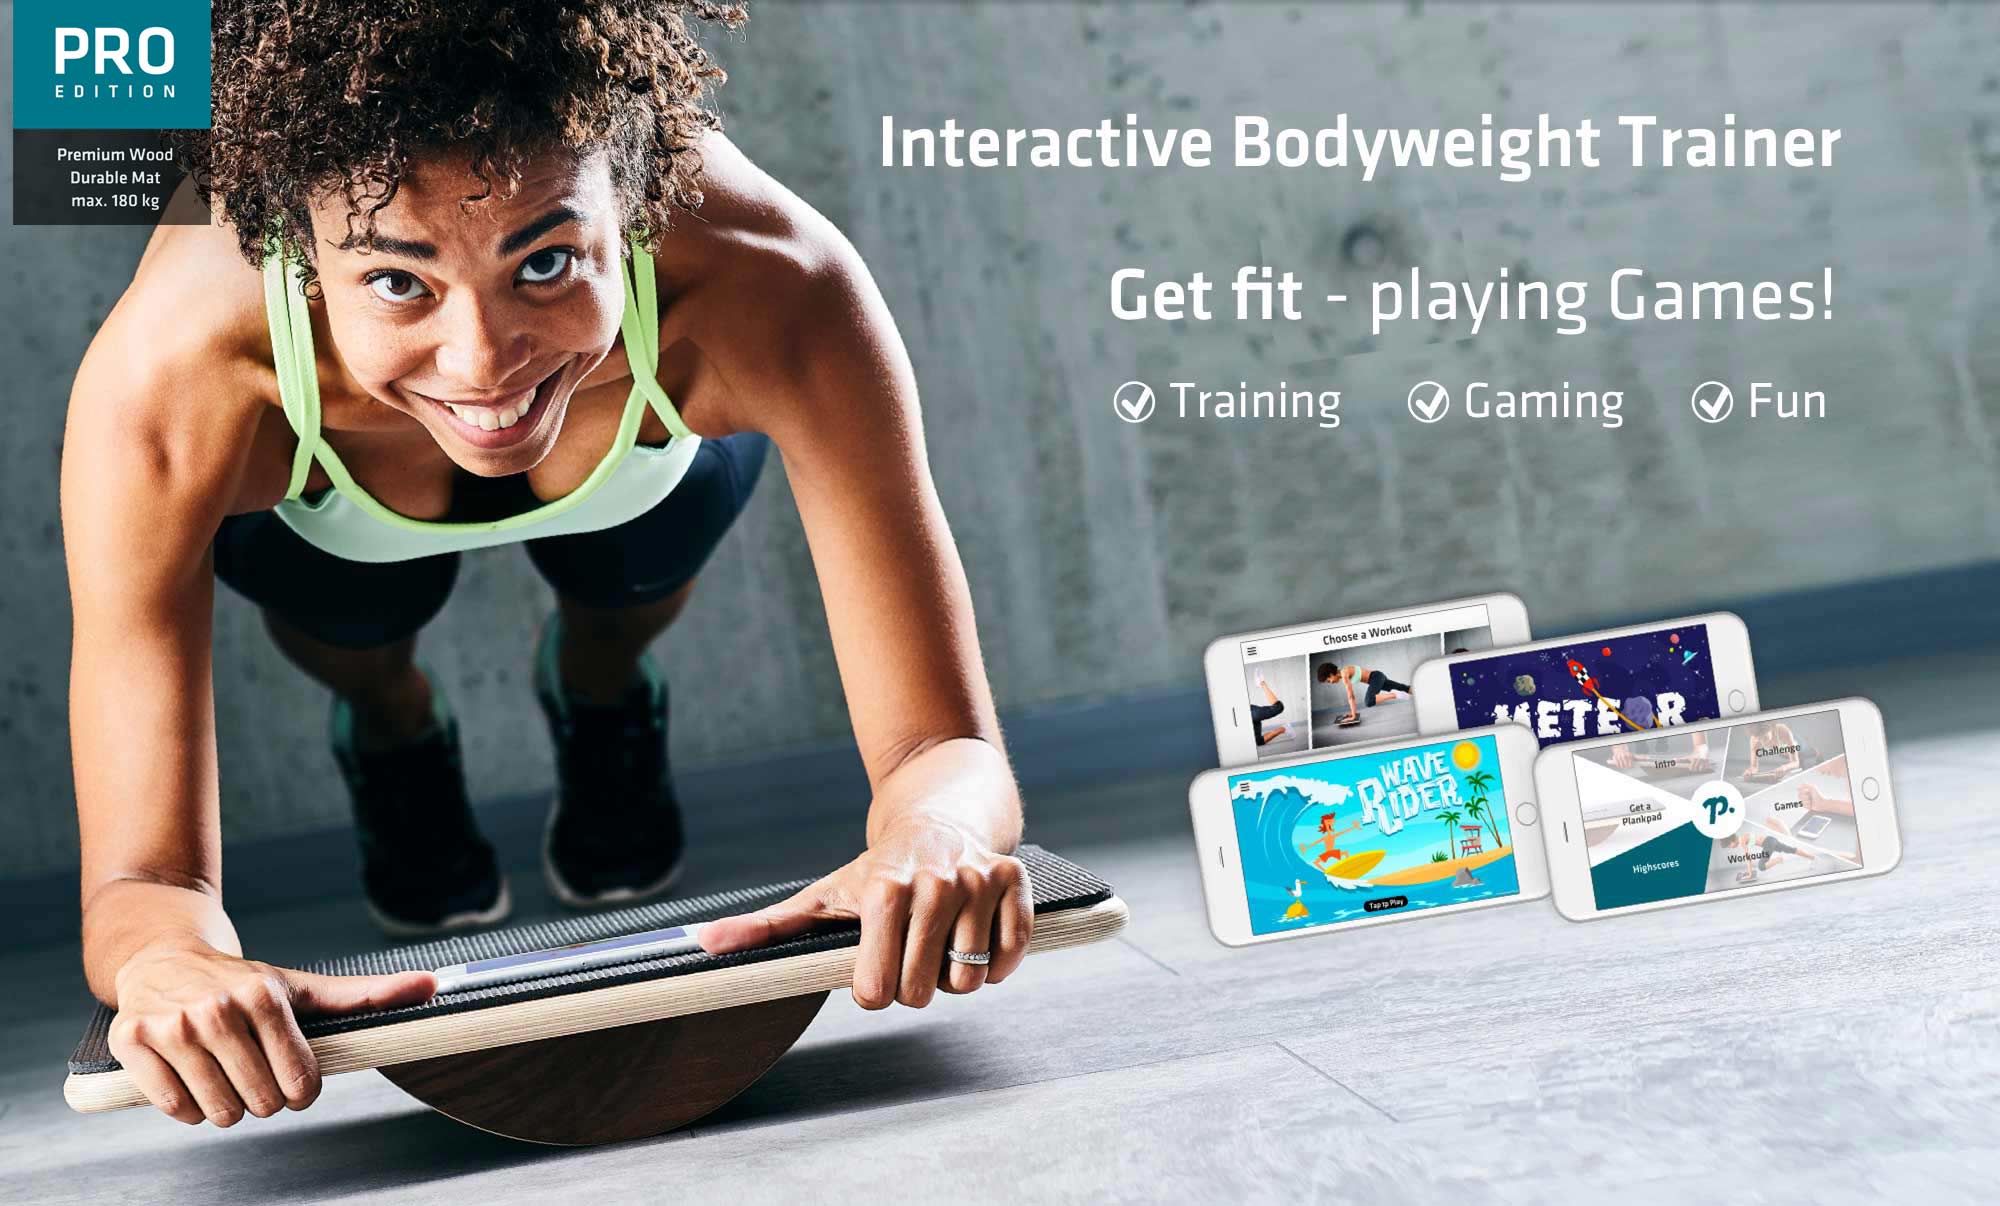 Plankpad PRO - Your Interactive Bodyweight Trainer